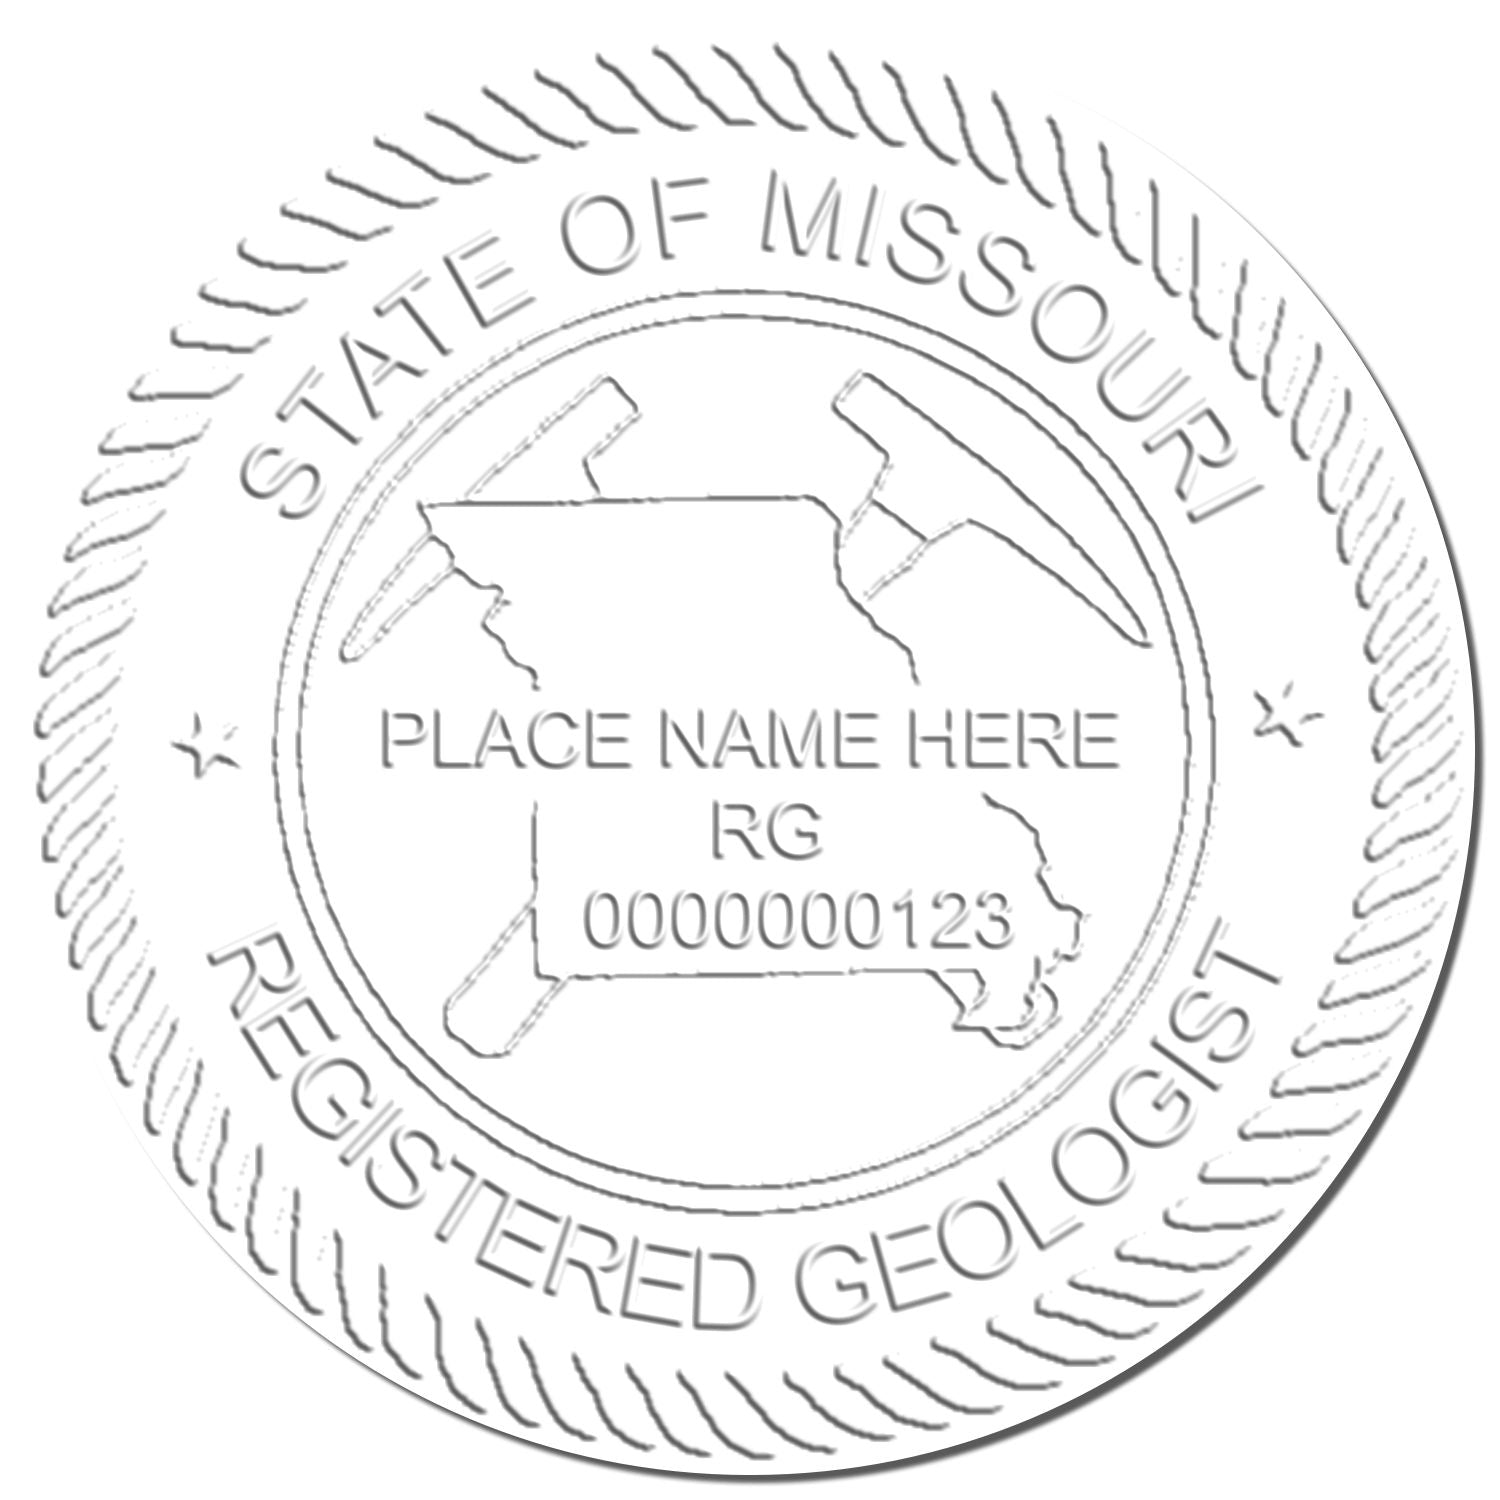 The main image for the Missouri Geologist Desk Seal depicting a sample of the imprint and imprint sample